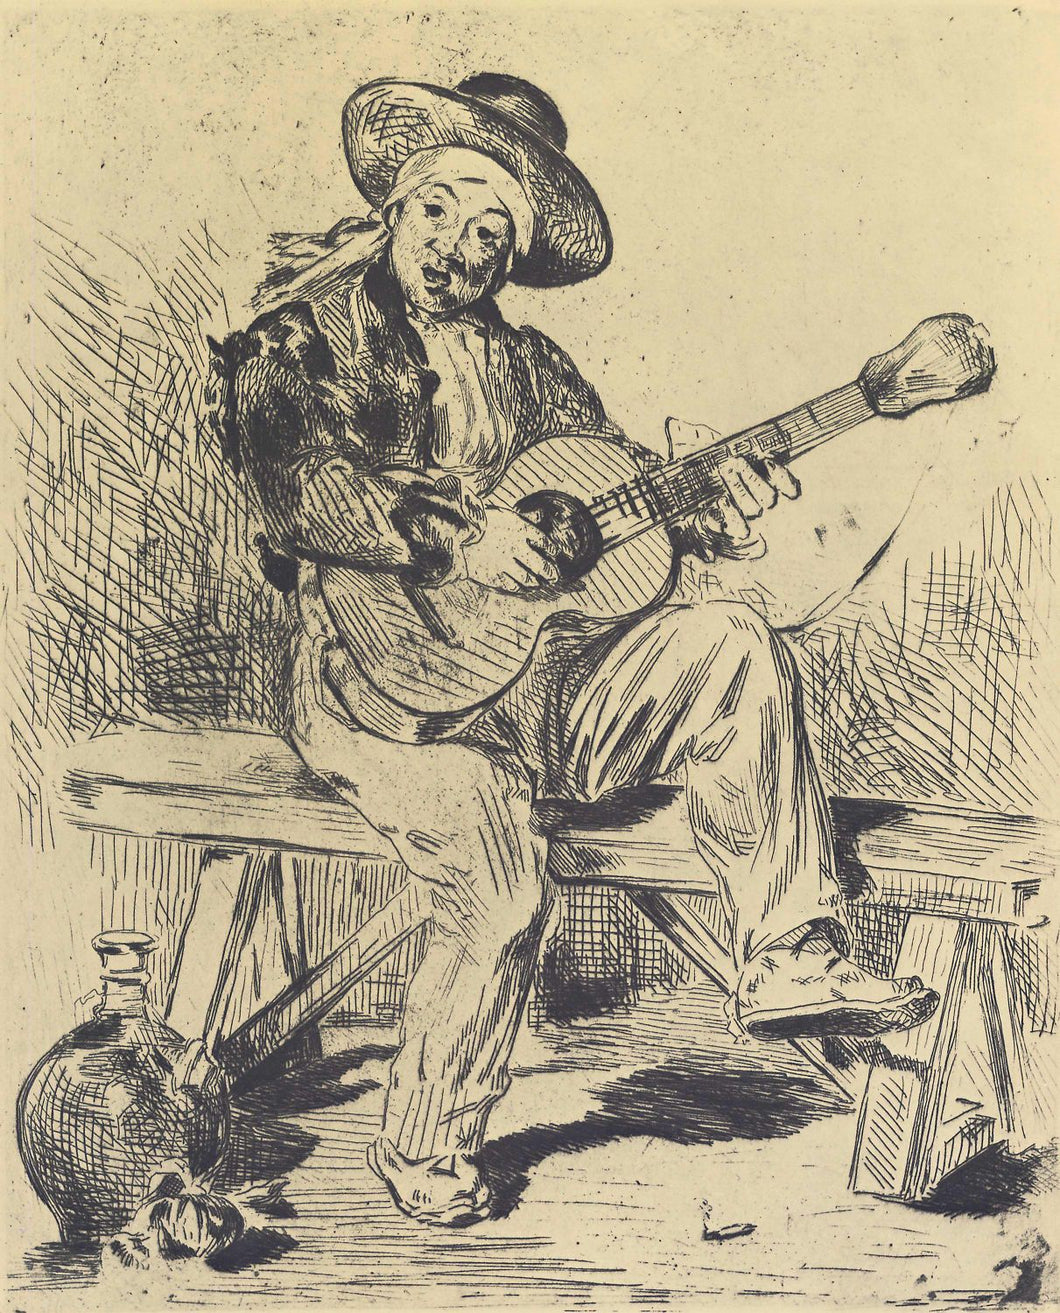 Édouard Manet - The guitar Player by Manet